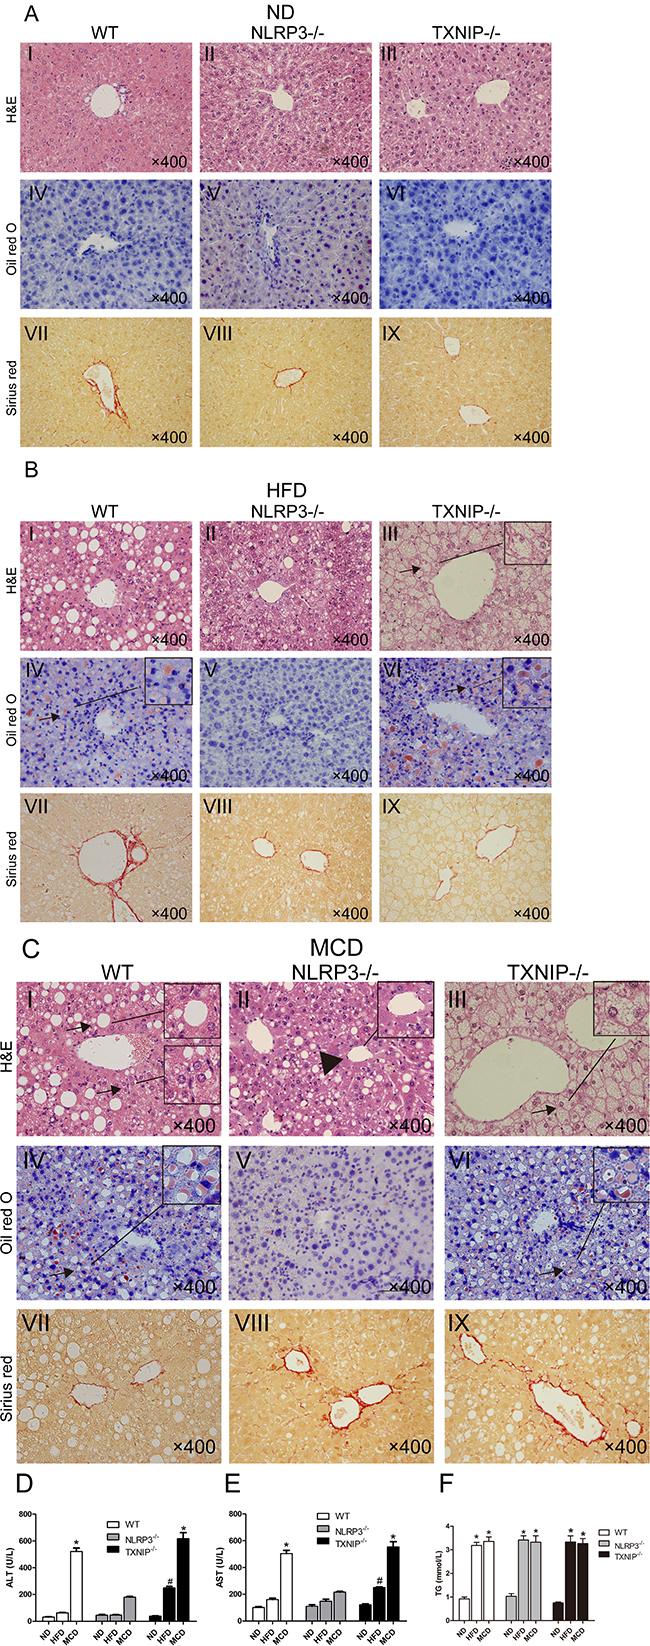 NLRP3&#x2212;/&#x2212; mice exhibit reduced hepatocyte injury in MCD group and TXNIP knockout results in exacerbated hepatocyte injury after HFD feeding.